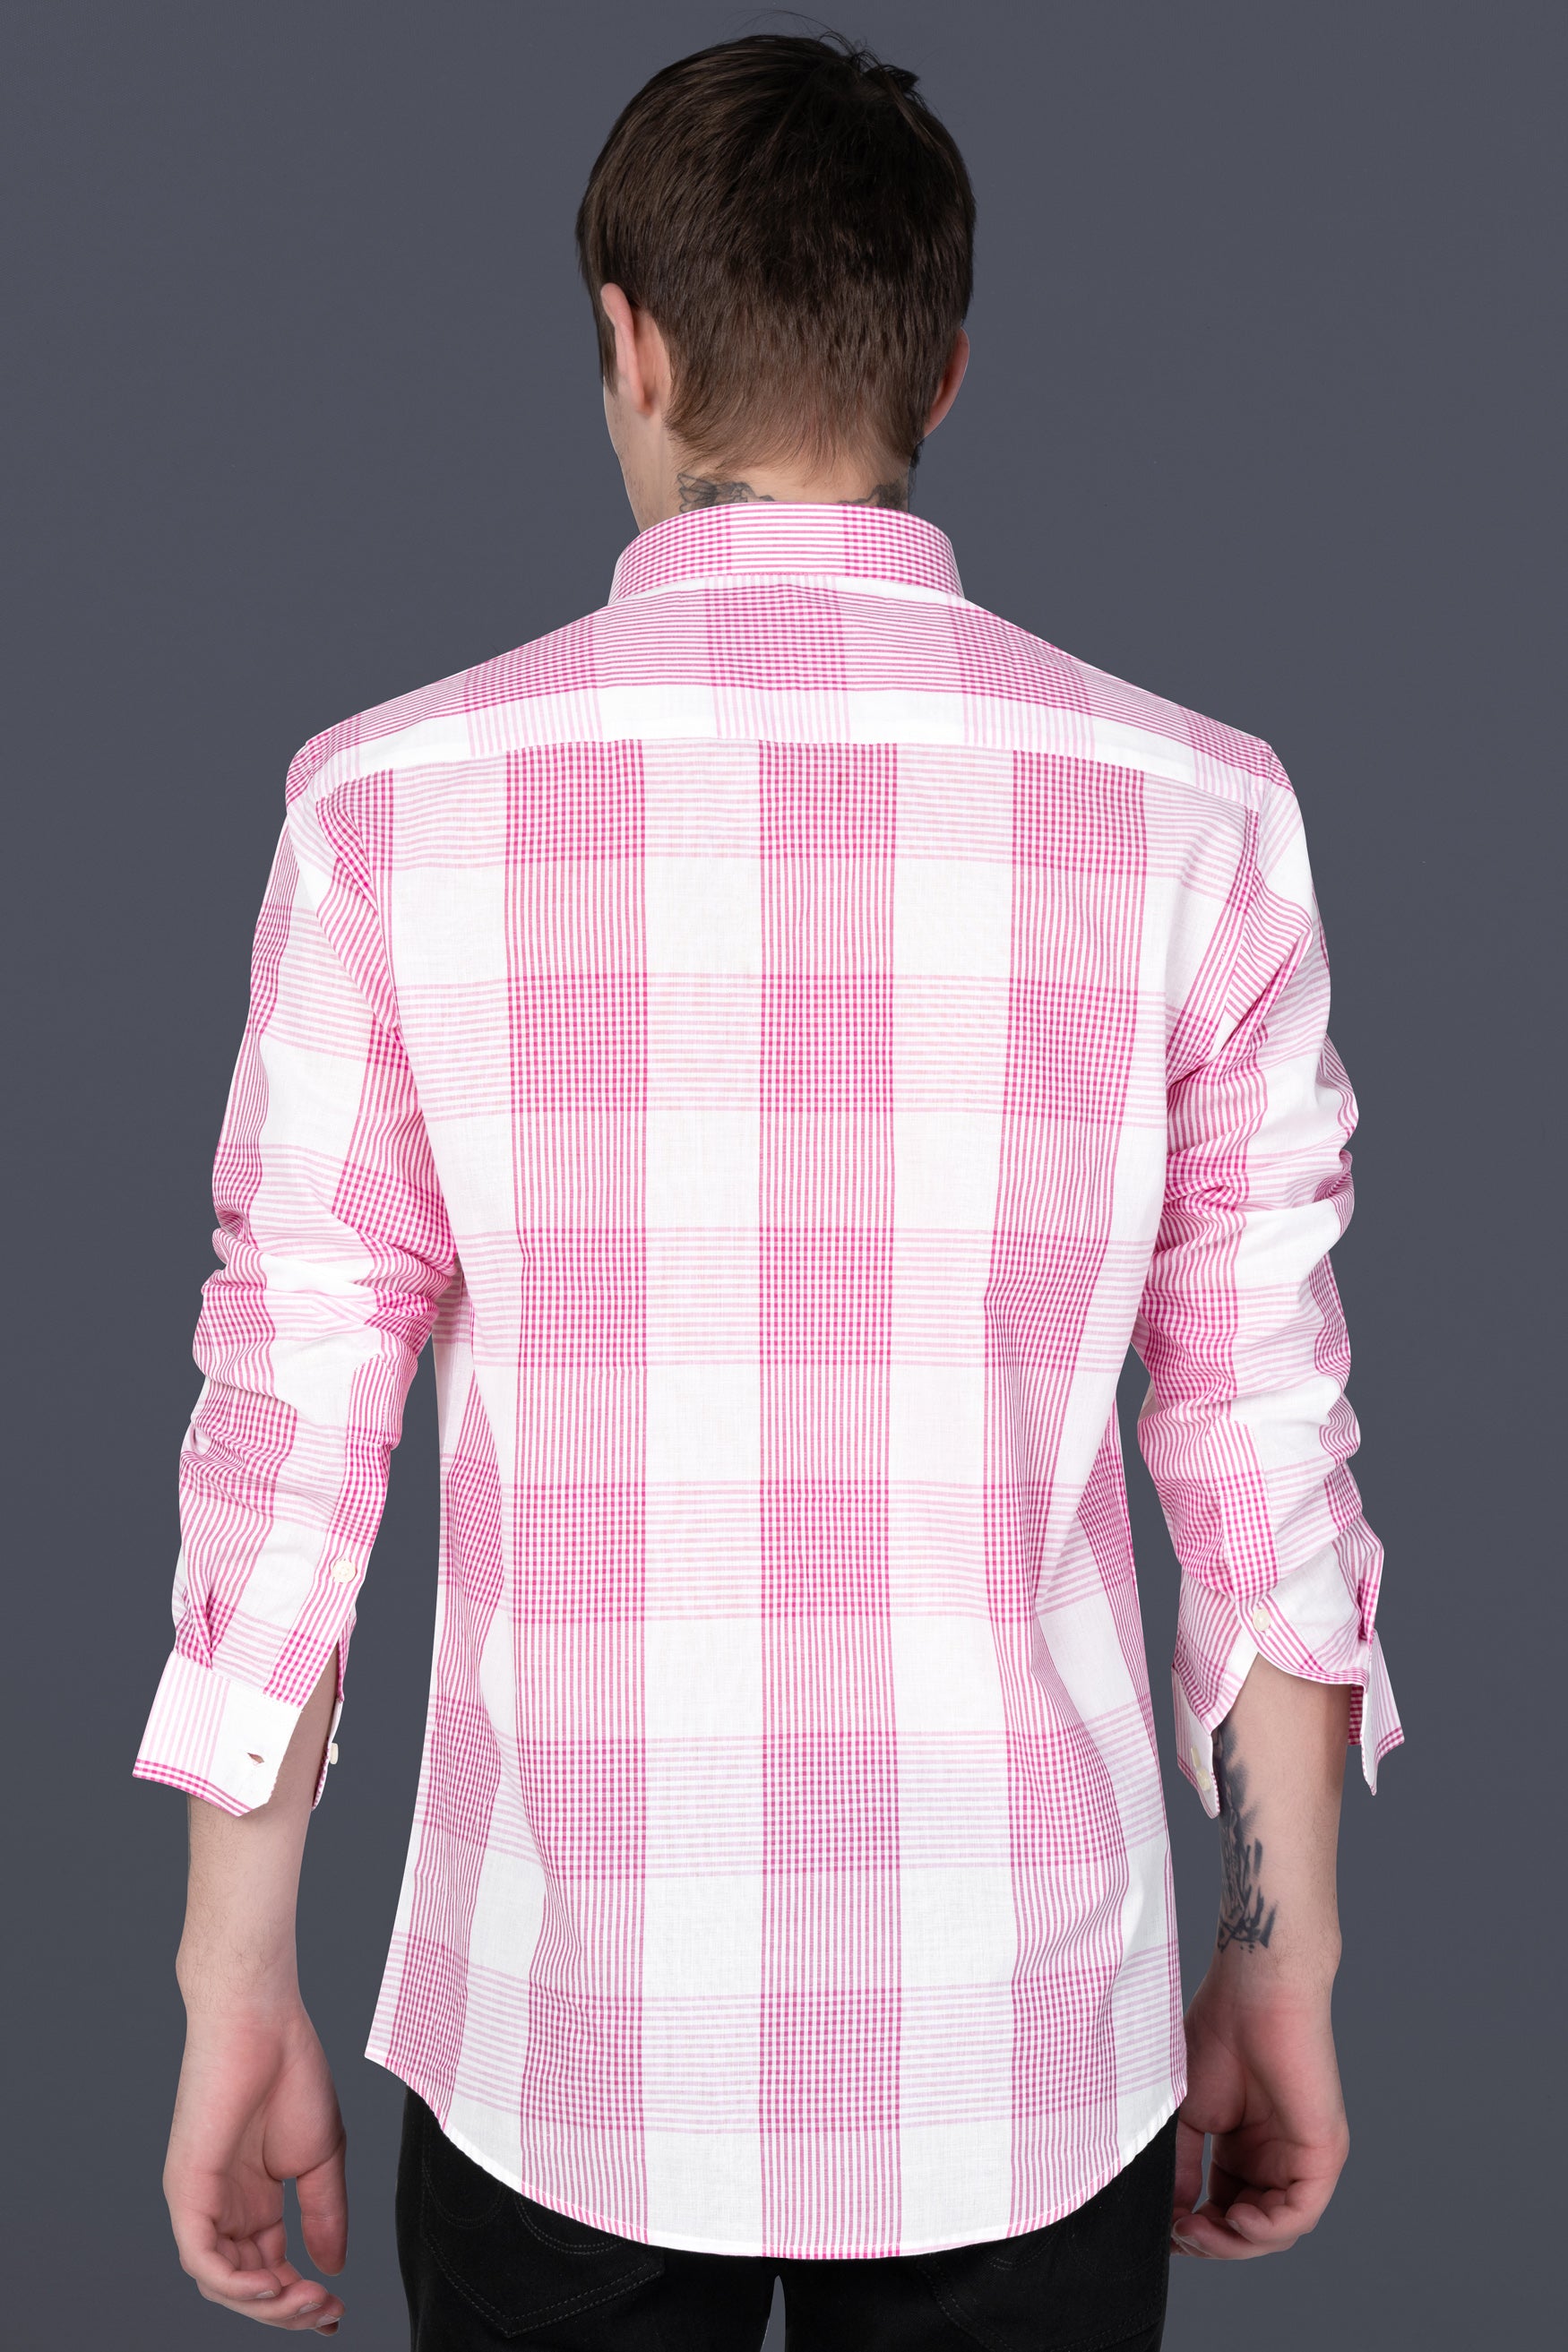 Bright White and Cadillac Pink Gingham Checkered Premium Cotton Shirt 12194-38, 12194-H-38, 12194-39, 12194-H-39, 12194-40, 12194-H-40, 12194-42, 12194-H-42, 12194-44, 12194-H-44, 12194-46, 12194-H-46, 12194-48, 12194-H-48, 12194-50, 12194-H-50, 12194-52, 12194-H-52